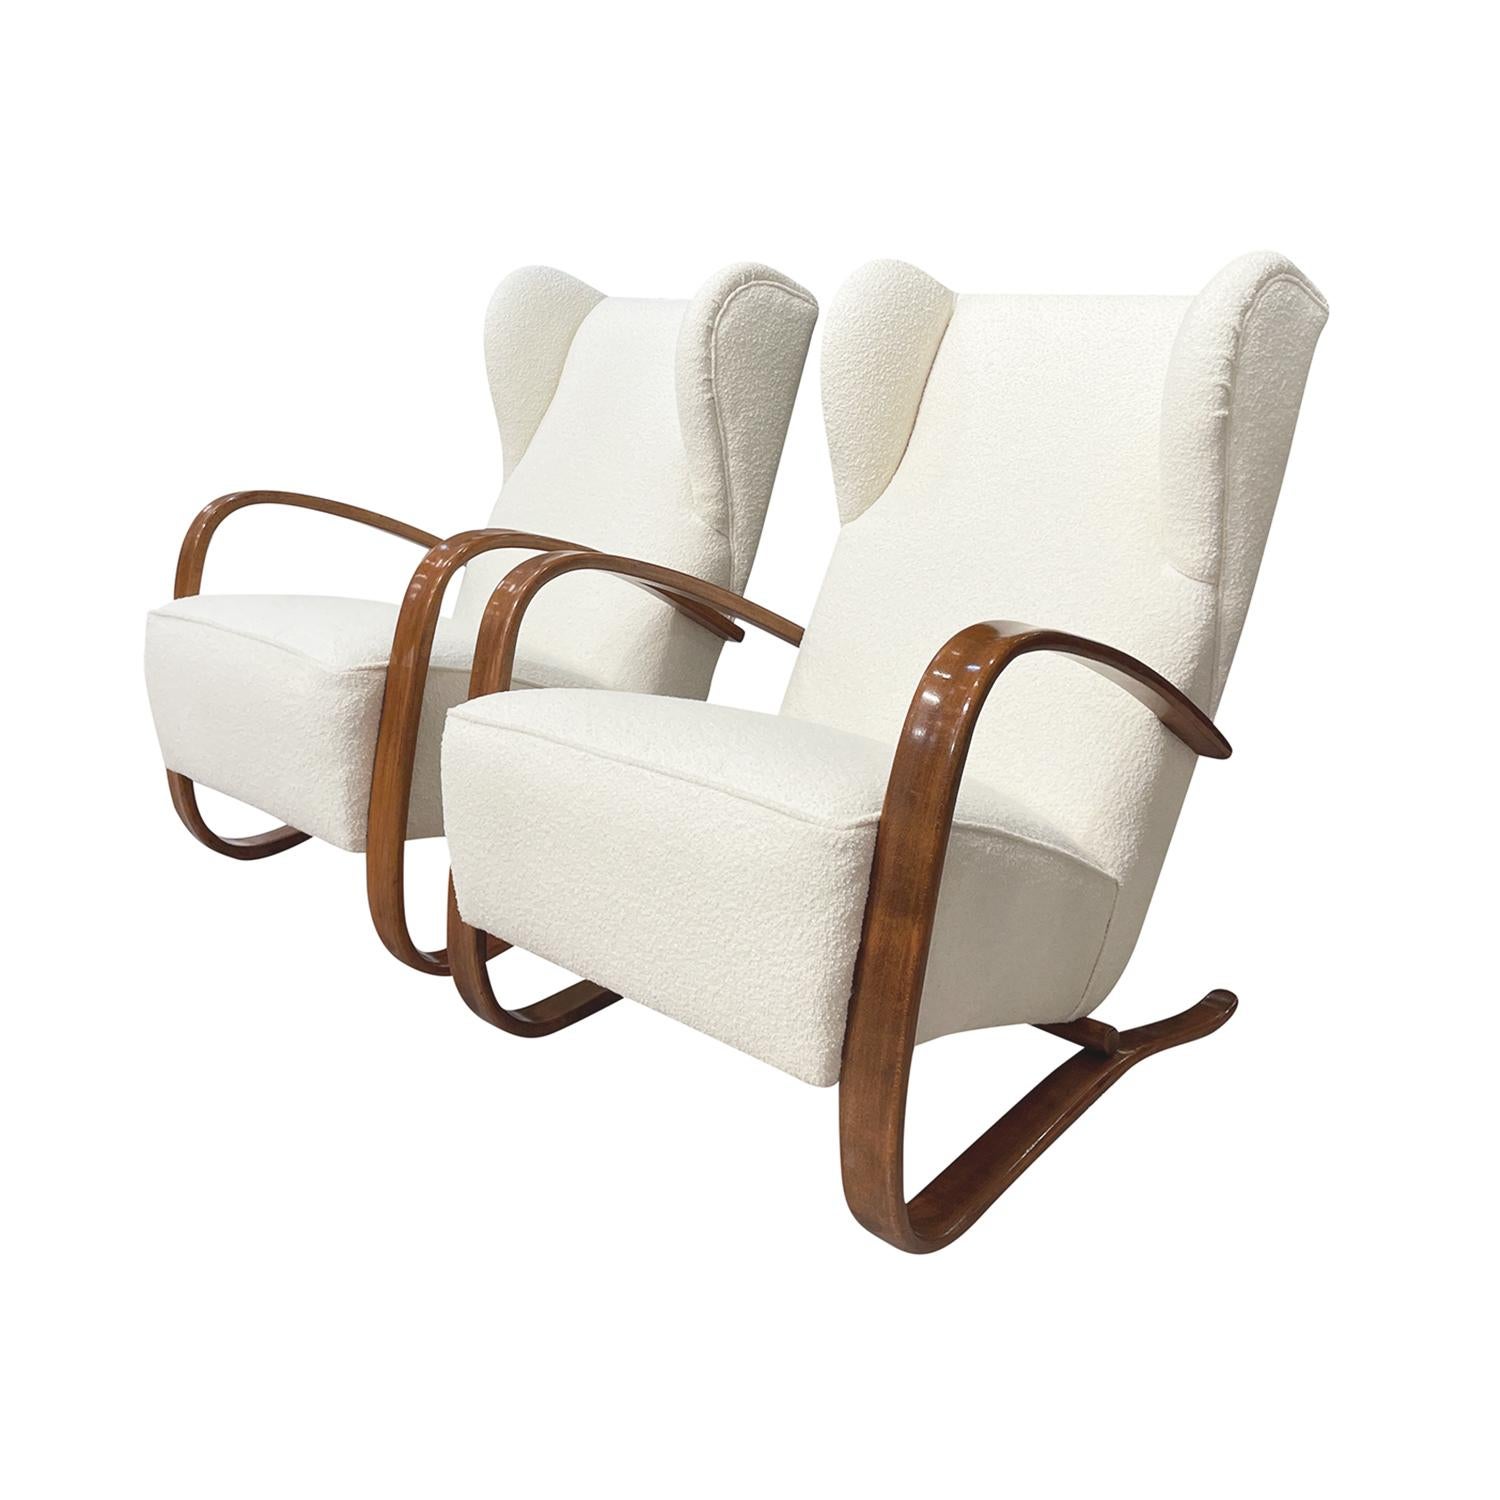 Polished 20th Century Czech Pair of Mahogany H269 Lounge Chairs by Jindrich Halabala